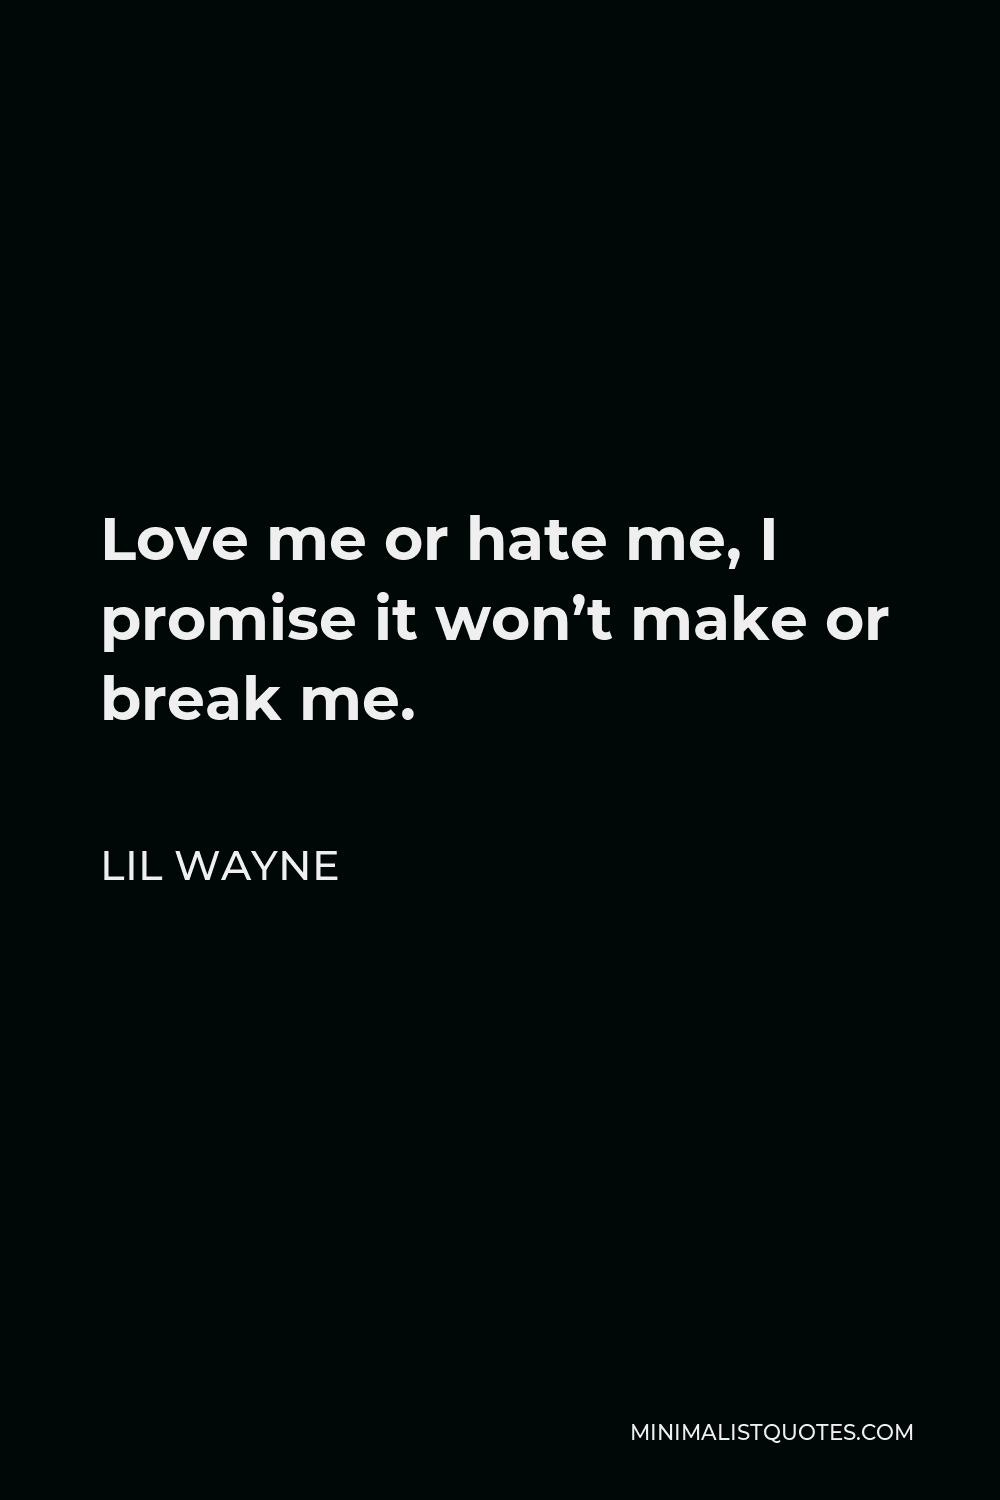 Lil Wayne Quote - Love me or hate me, I promise it won’t make or break me.